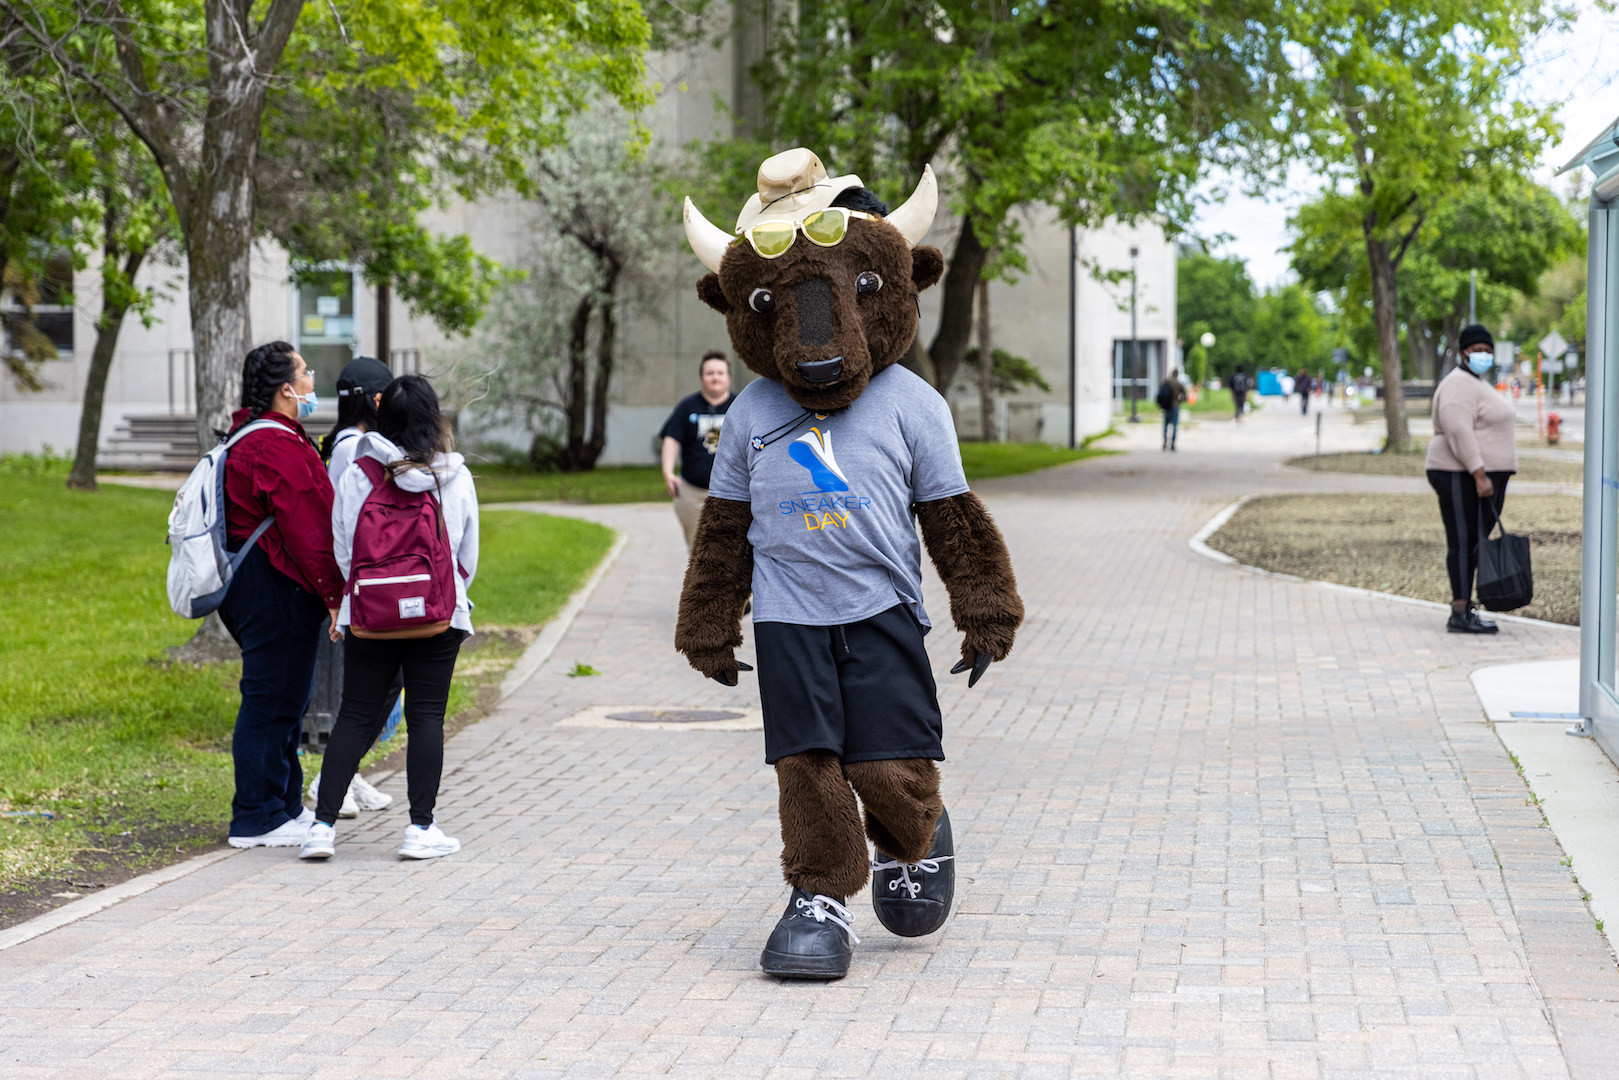 Billy the Bison, UM mascot, walking on a path at Fort Garry campus.